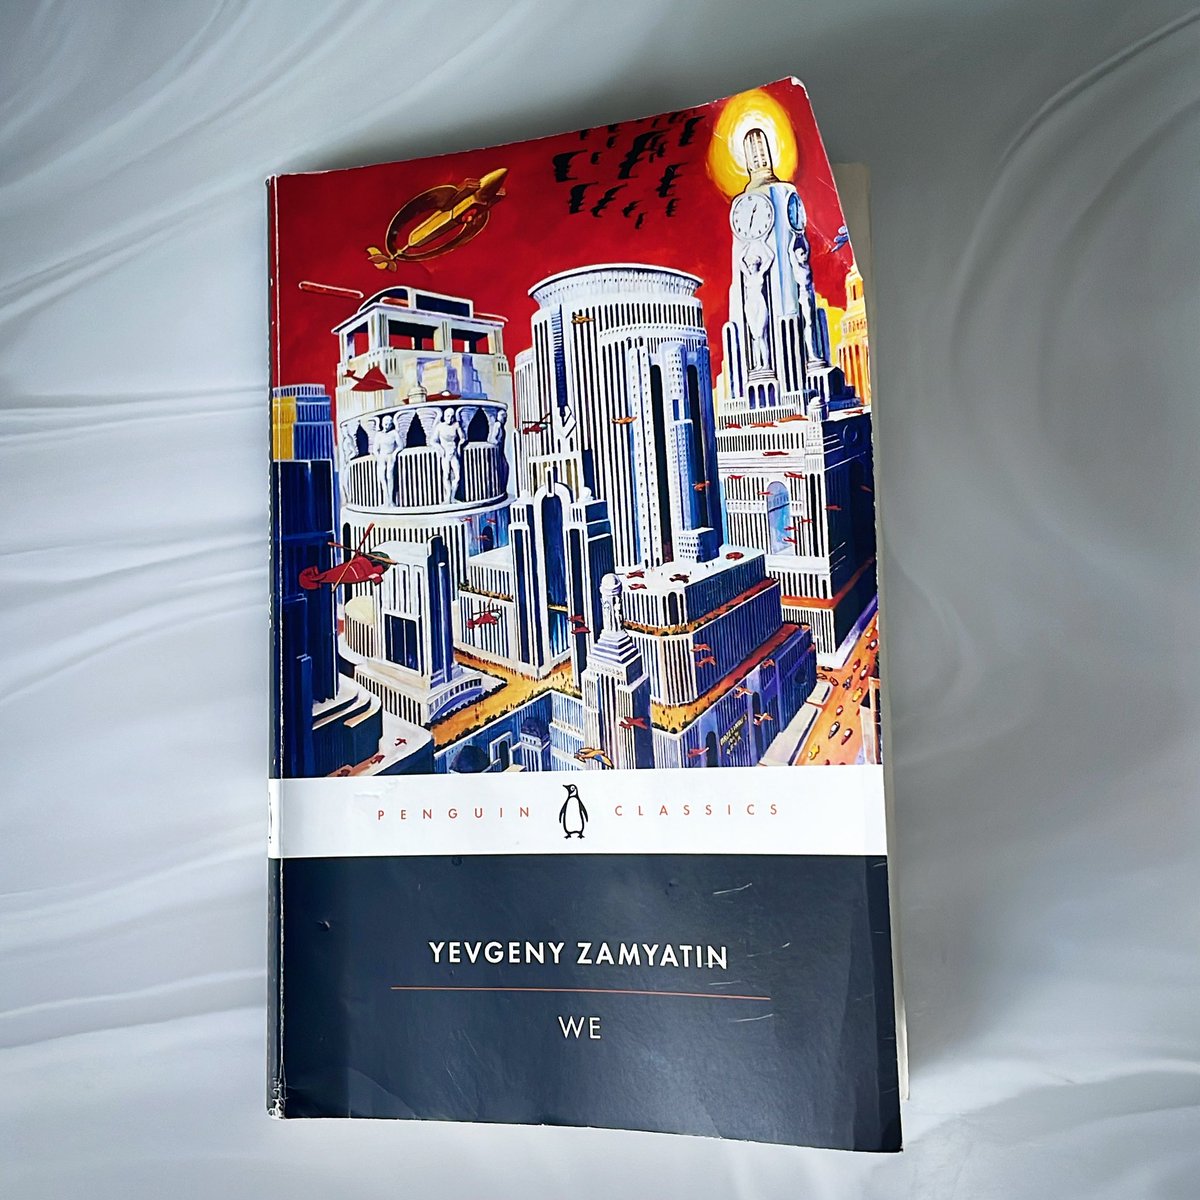 When I was a teenager, I was really into dystopian novels. Zamyatin's 'We' is not only up there among the best examples of the genre but it probably could be called one of the most seminal works in that area. My 20th book of the year. Goodreads: 3.89